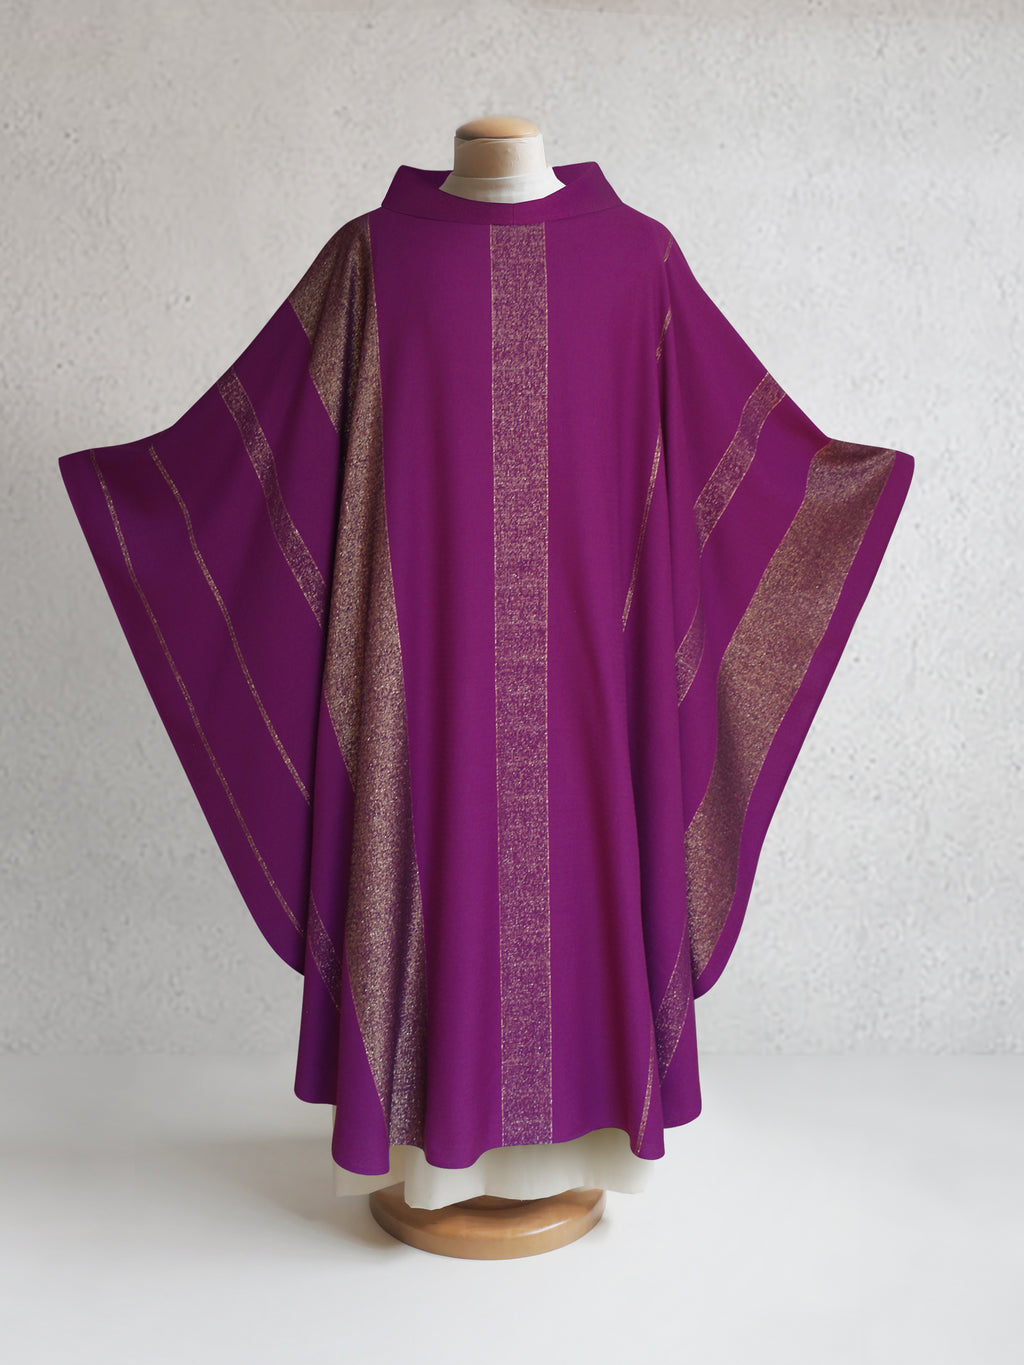 Beaulieux Woven Chasuble in Purple